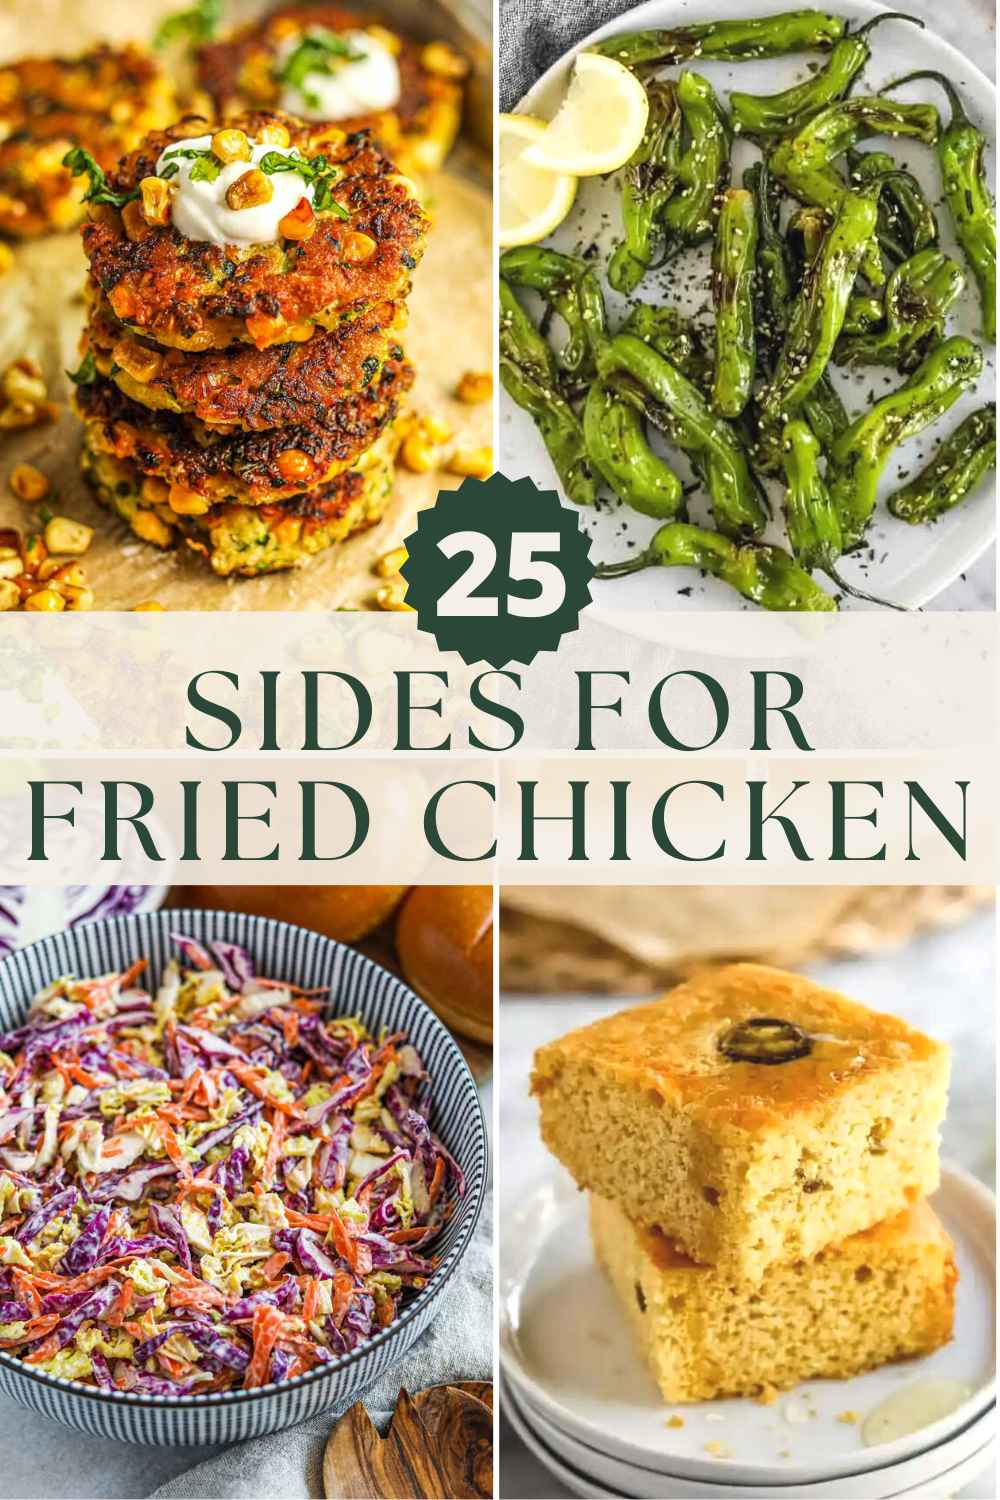 25 best sides for fried chicken Pinterest pin.